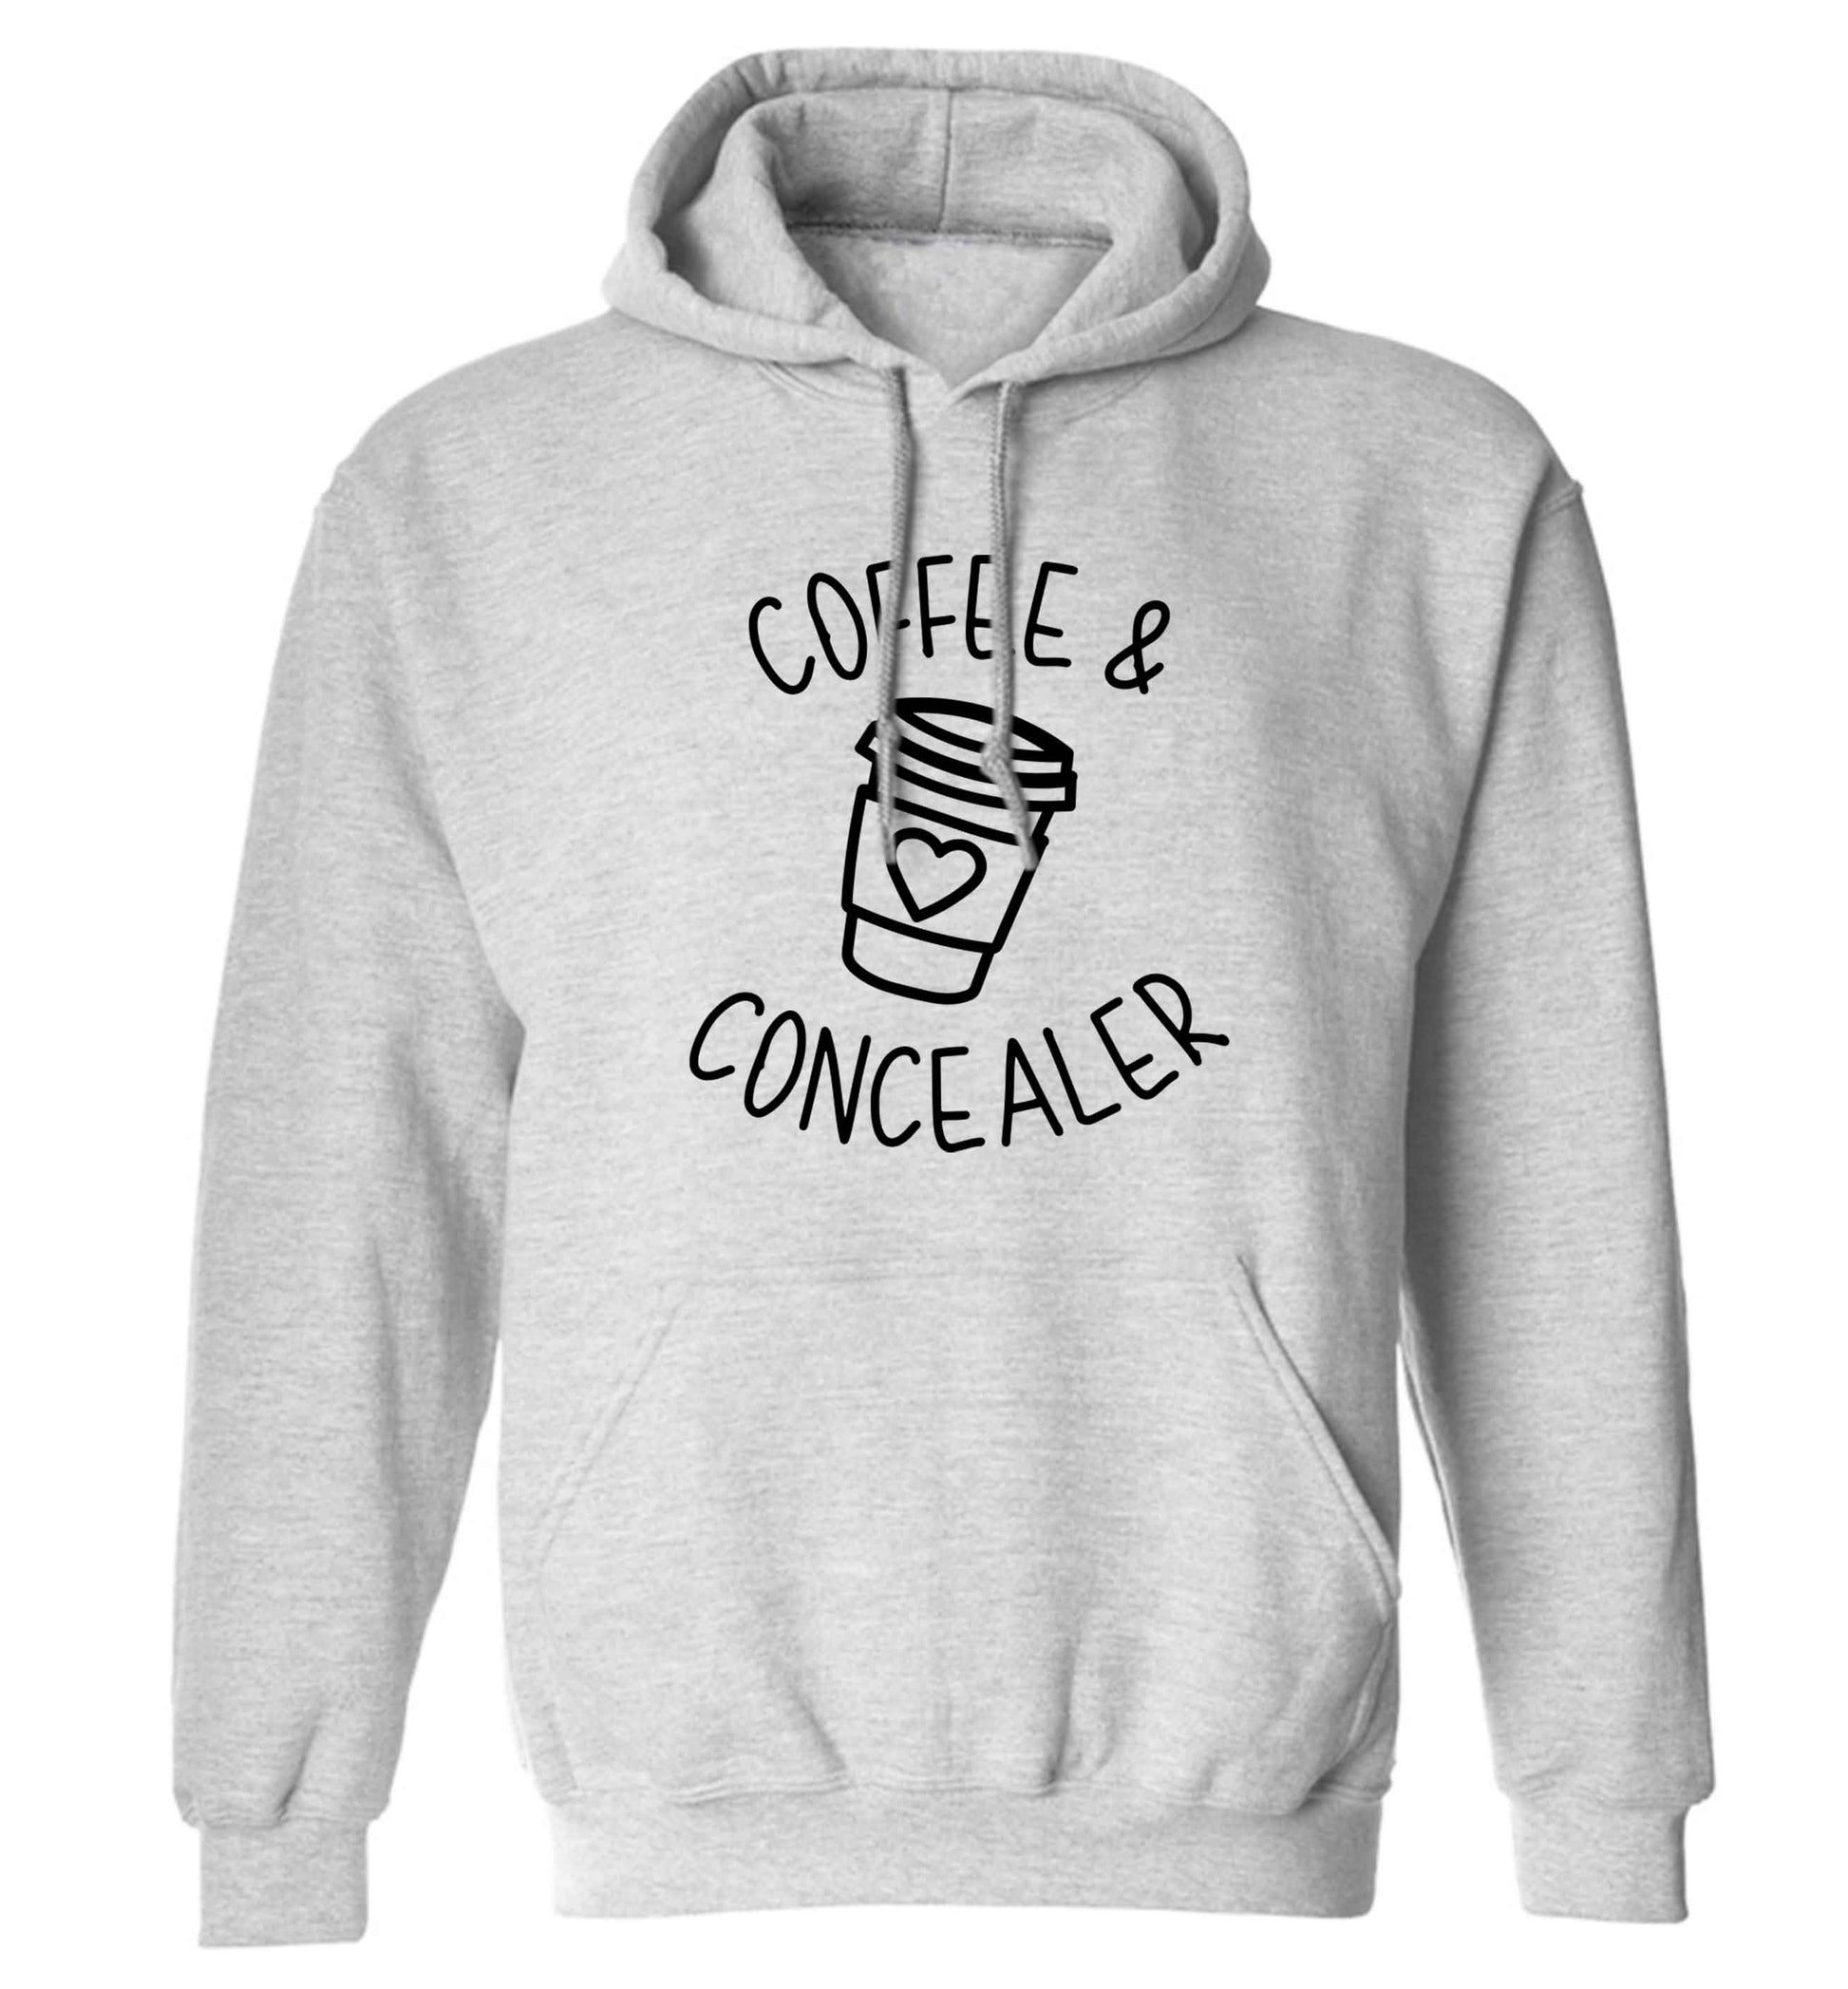 Coffee and concealer adults unisex grey hoodie 2XL